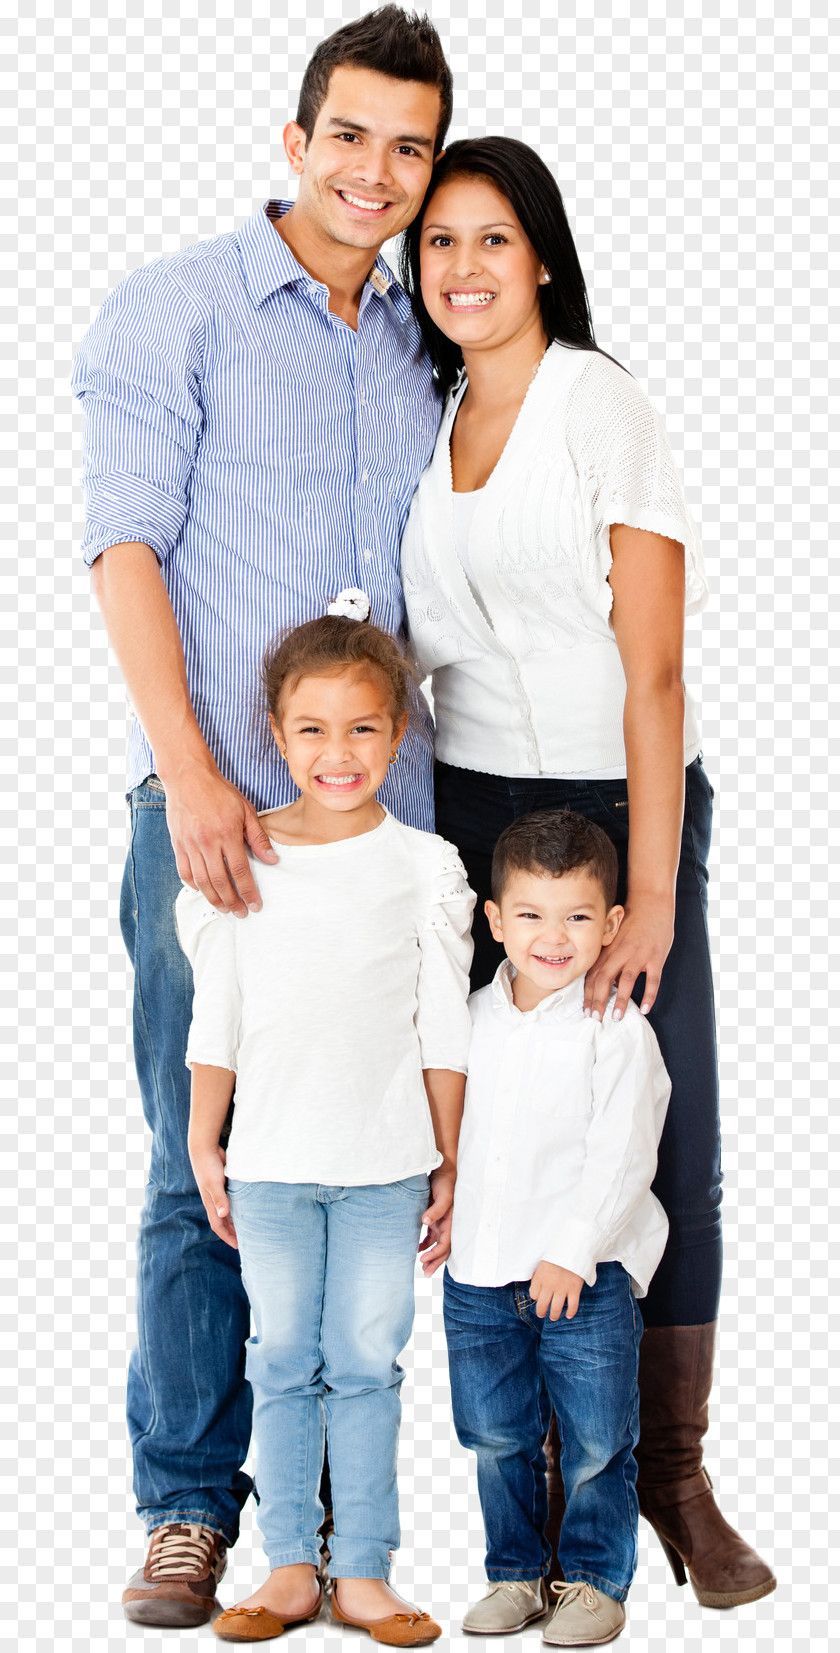 Jeans Smile White Background People PNG